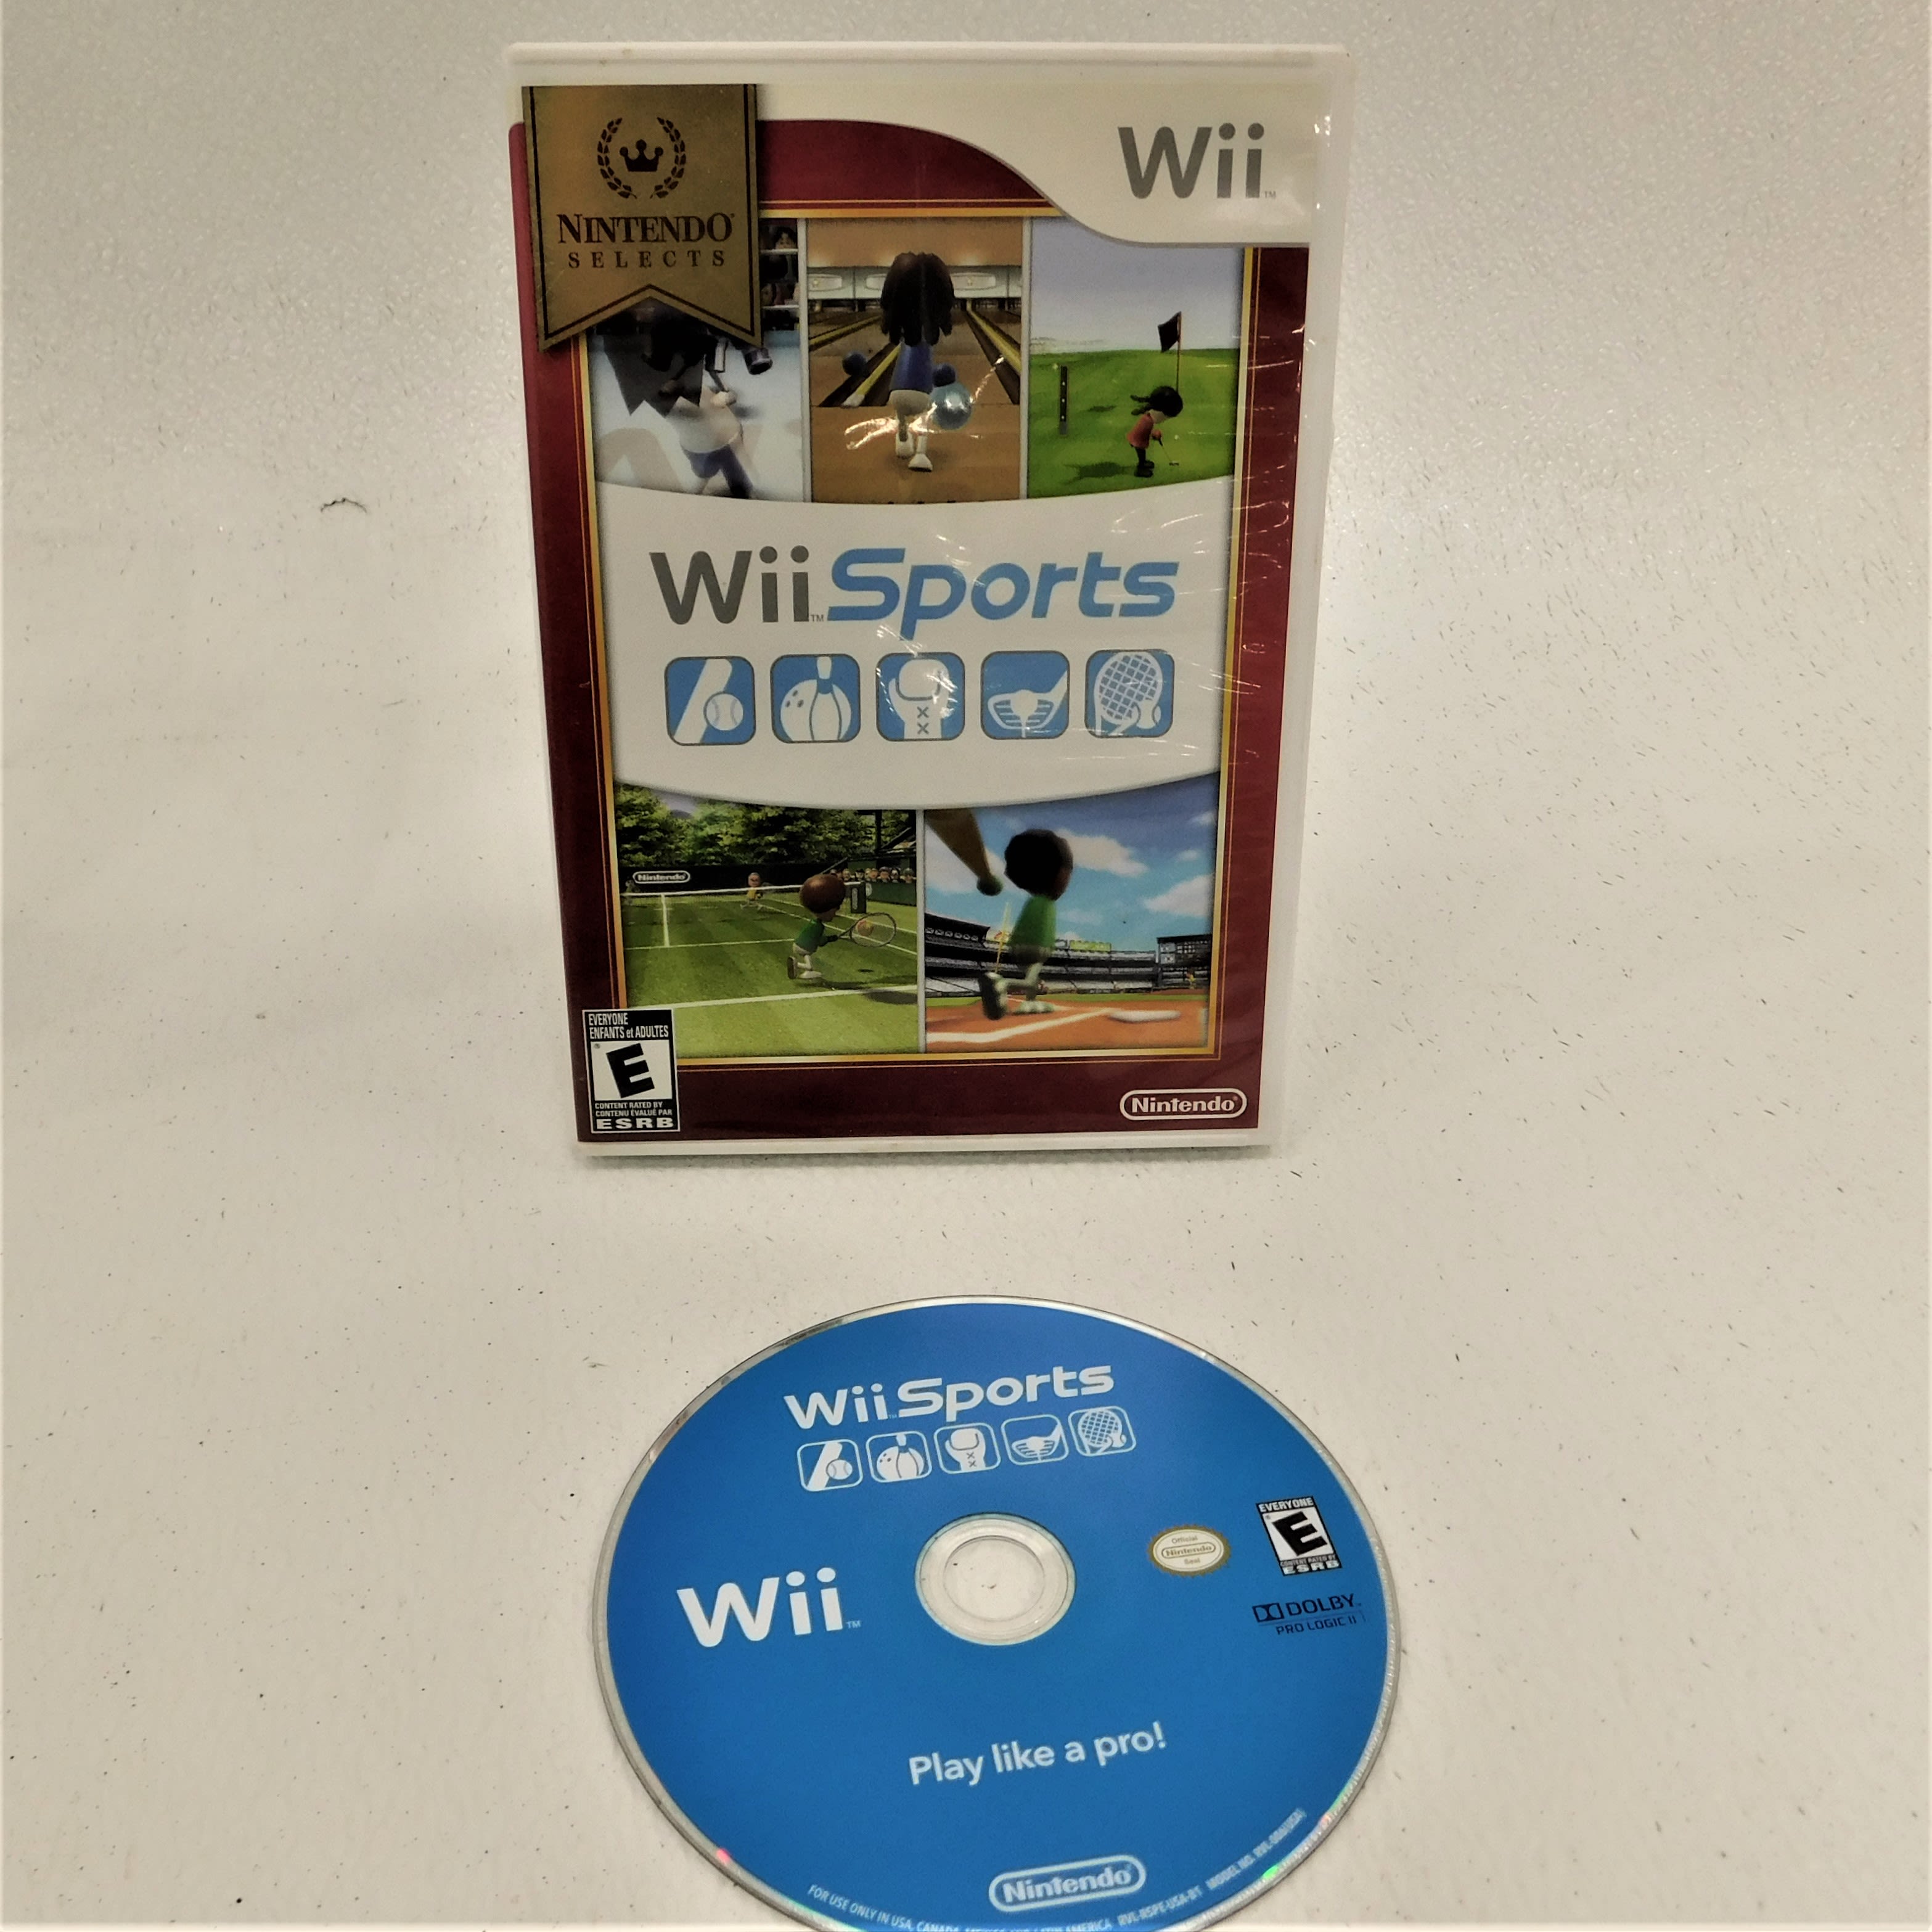 Wii Sports - Nintendo Selects (Wii) 